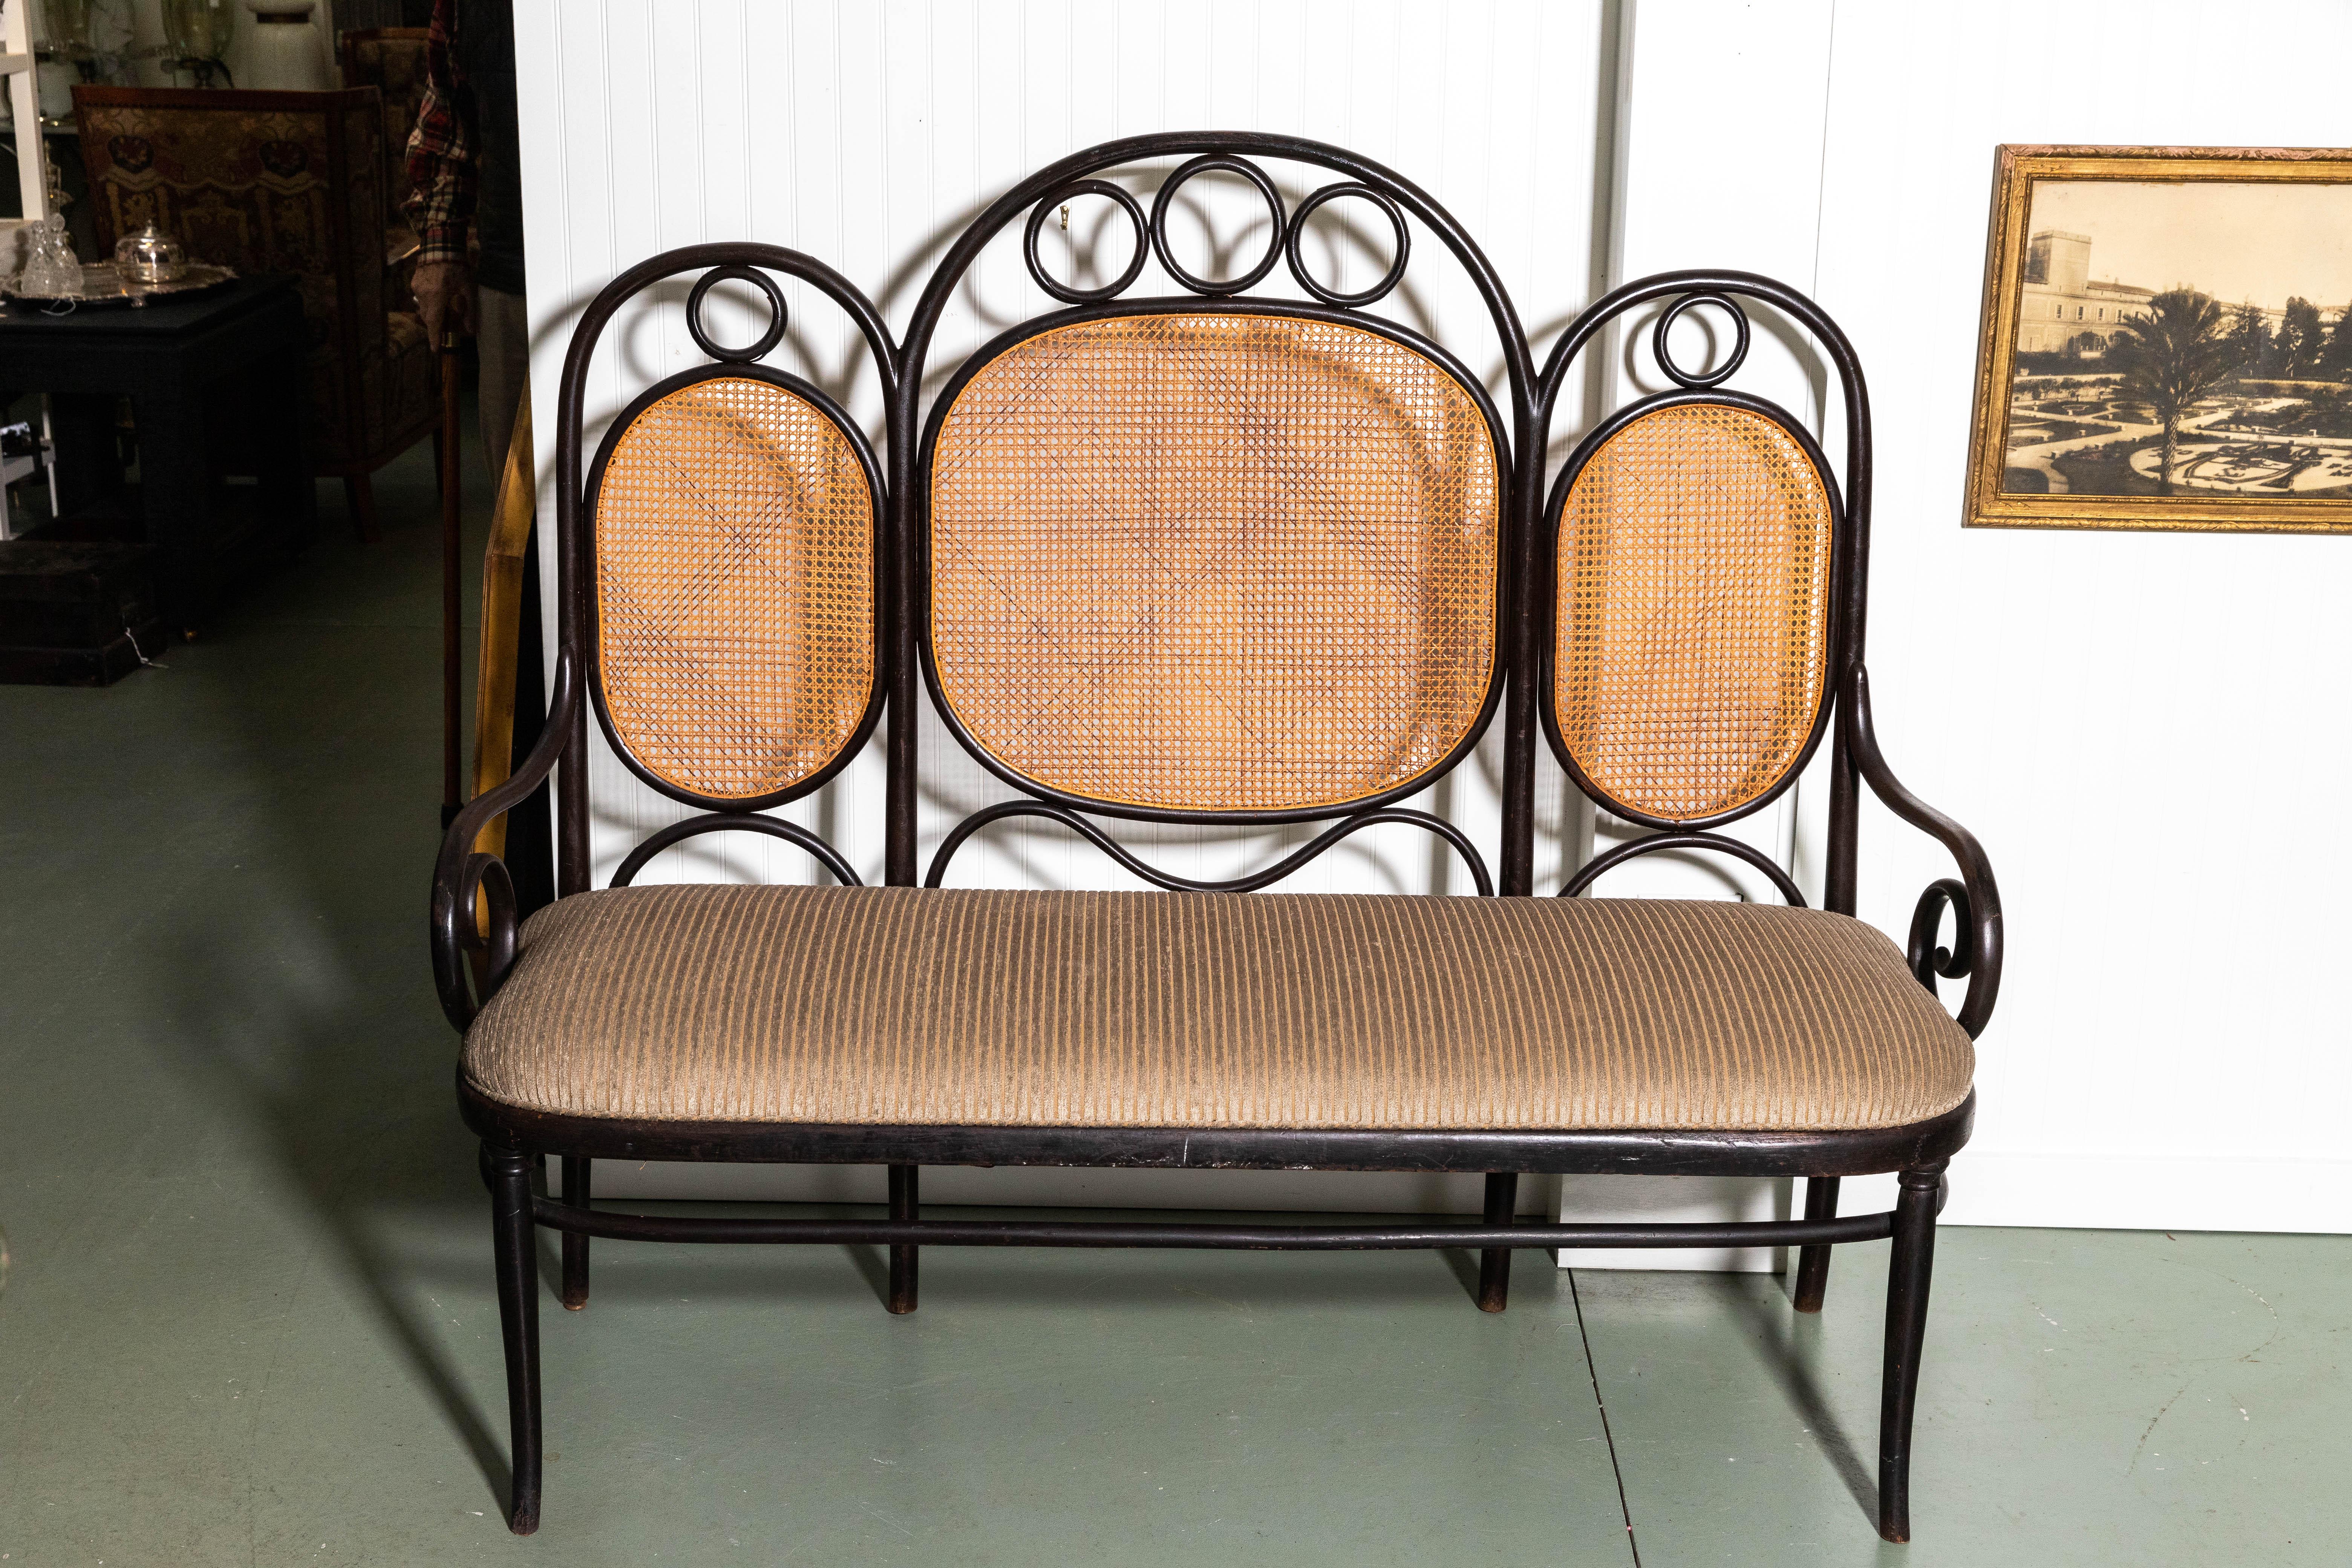 Curvilinear caned back with upholstered seat. Beautiful lines and original finish.